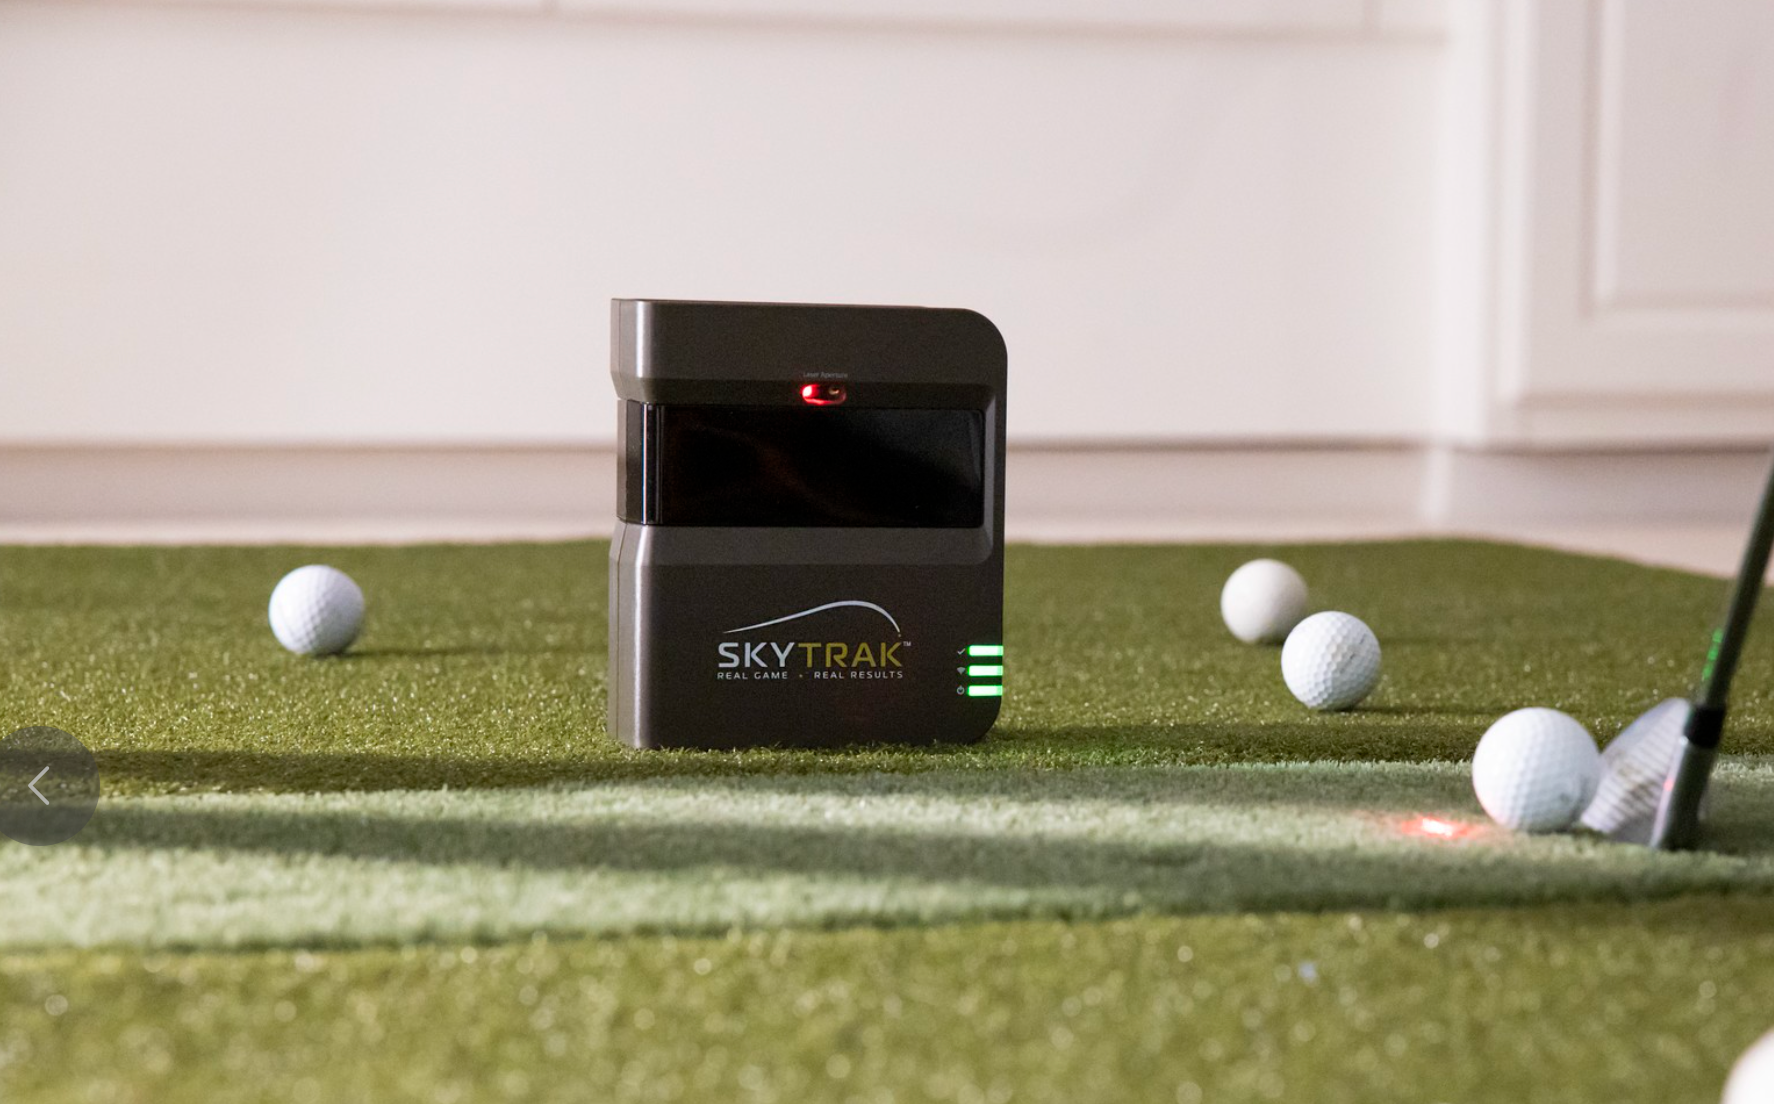 WE ASKED SKYTRAK OWNERS IF THEY WERE HAPPY WITH THEIR PURCHASE – HERE ARE THE POLL RESULTS